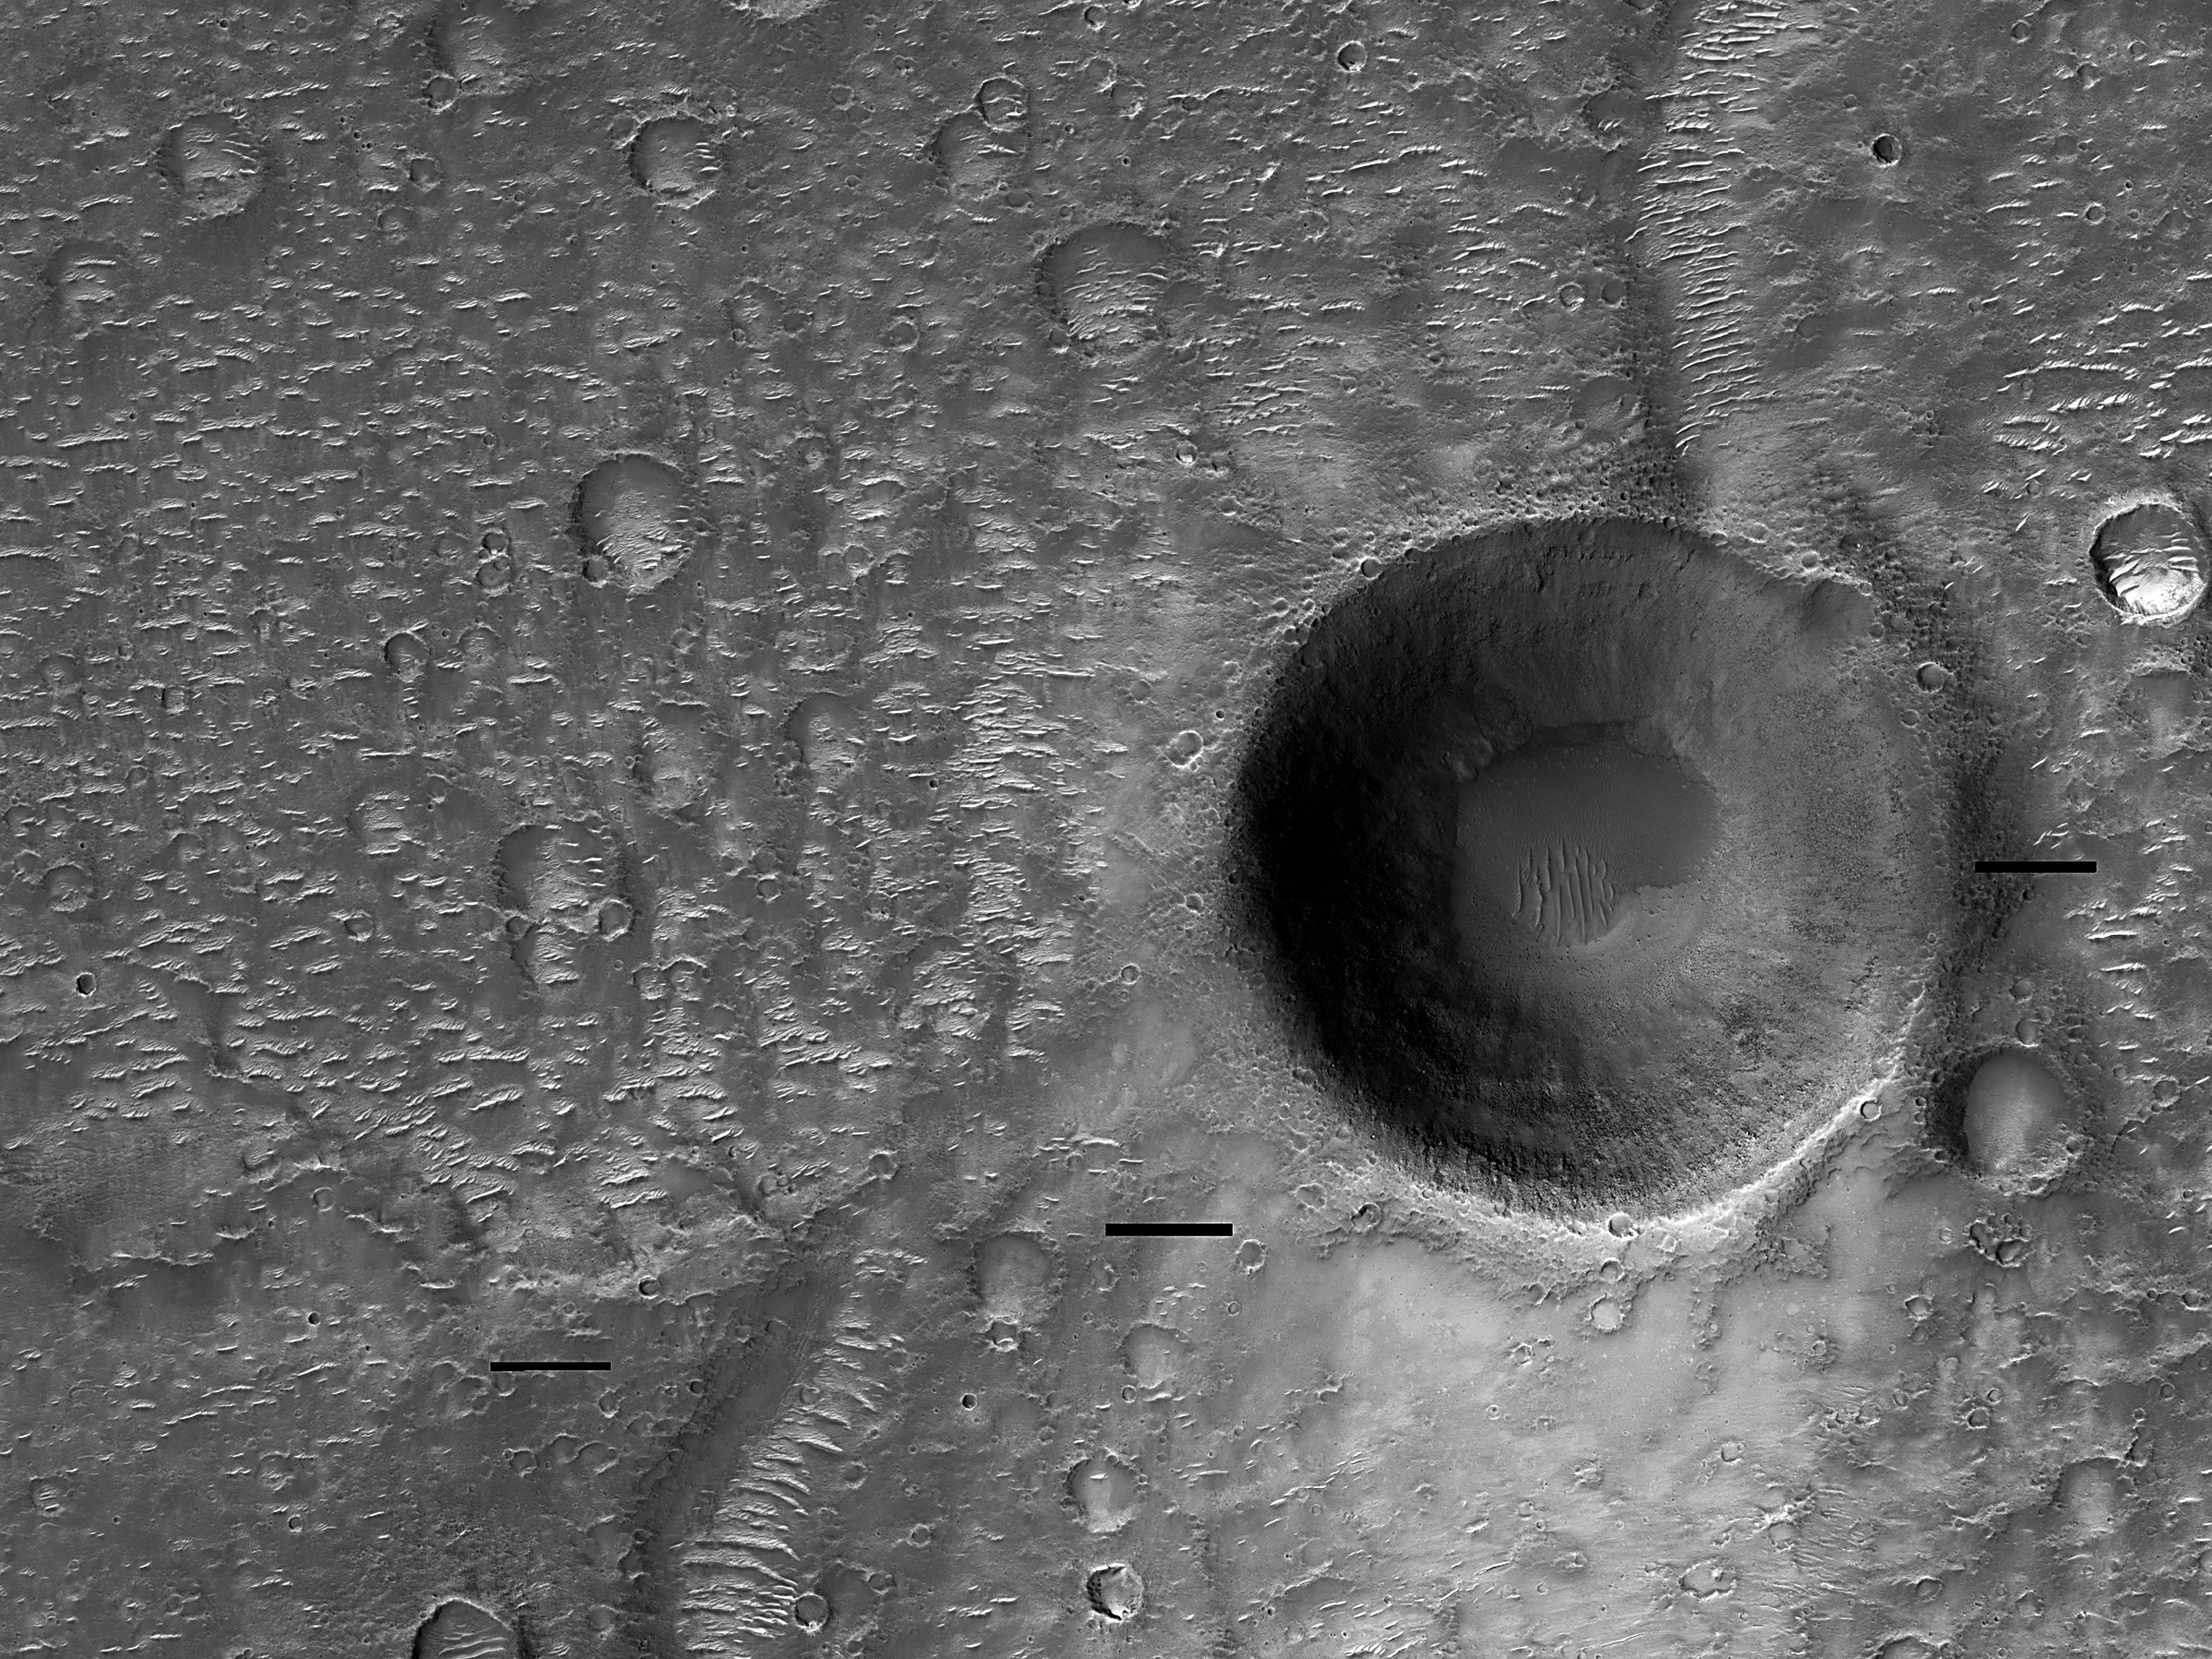 Channel and Crater in Hesperia Planum